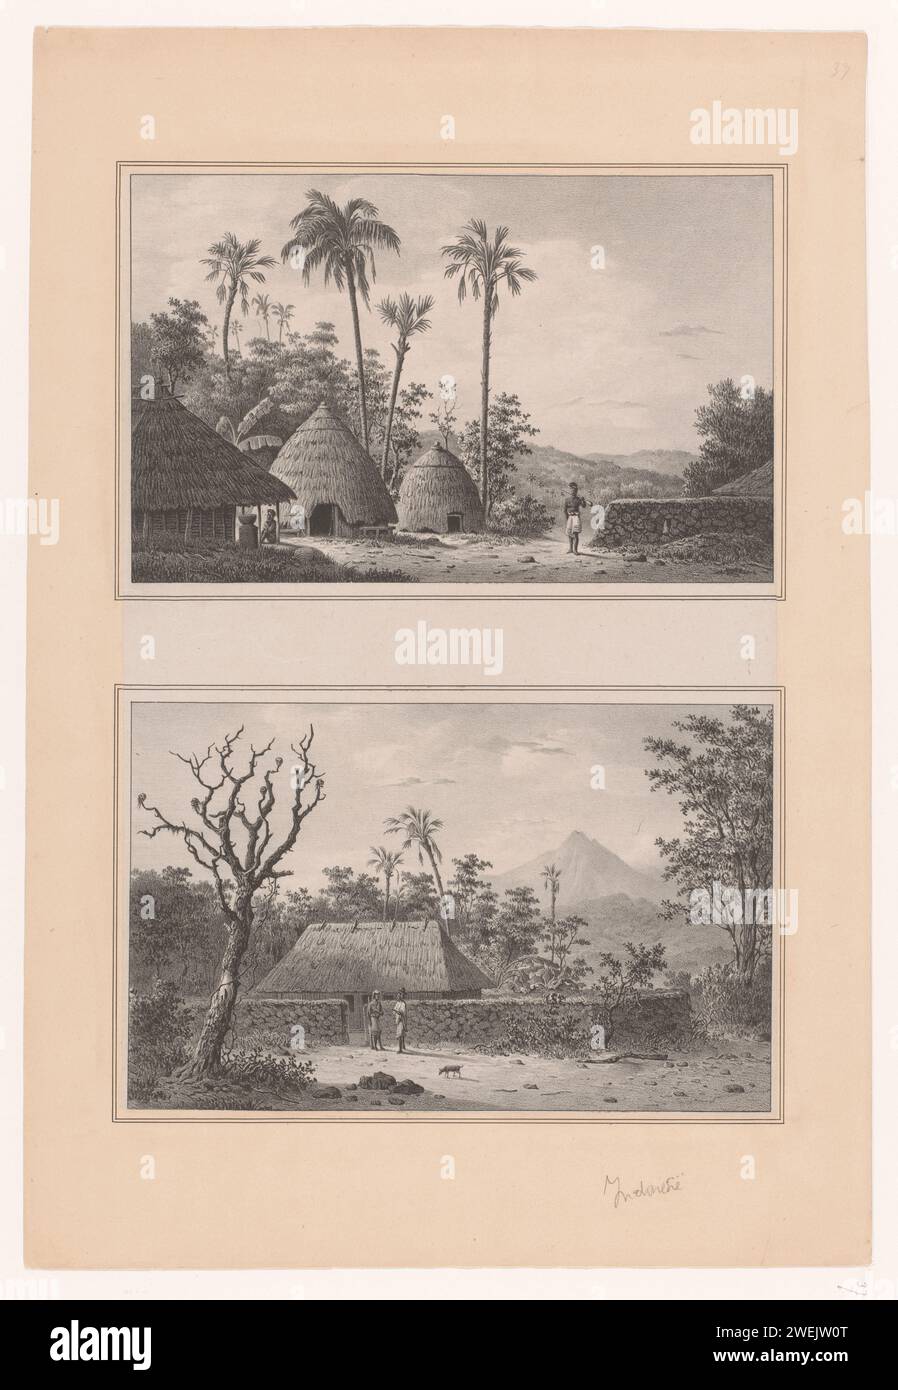 Two images of homes in Indonesia, Anonymous, 1830 - 1880 print Two images on a leaf. On the top image is a man with a weapon over his shoulder, to his left three dome -shaped structures. On the bottom image there are two figures at a low wall around a rectangular building.  paper.  hut, cabin, lodge Indonesia Stock Photo